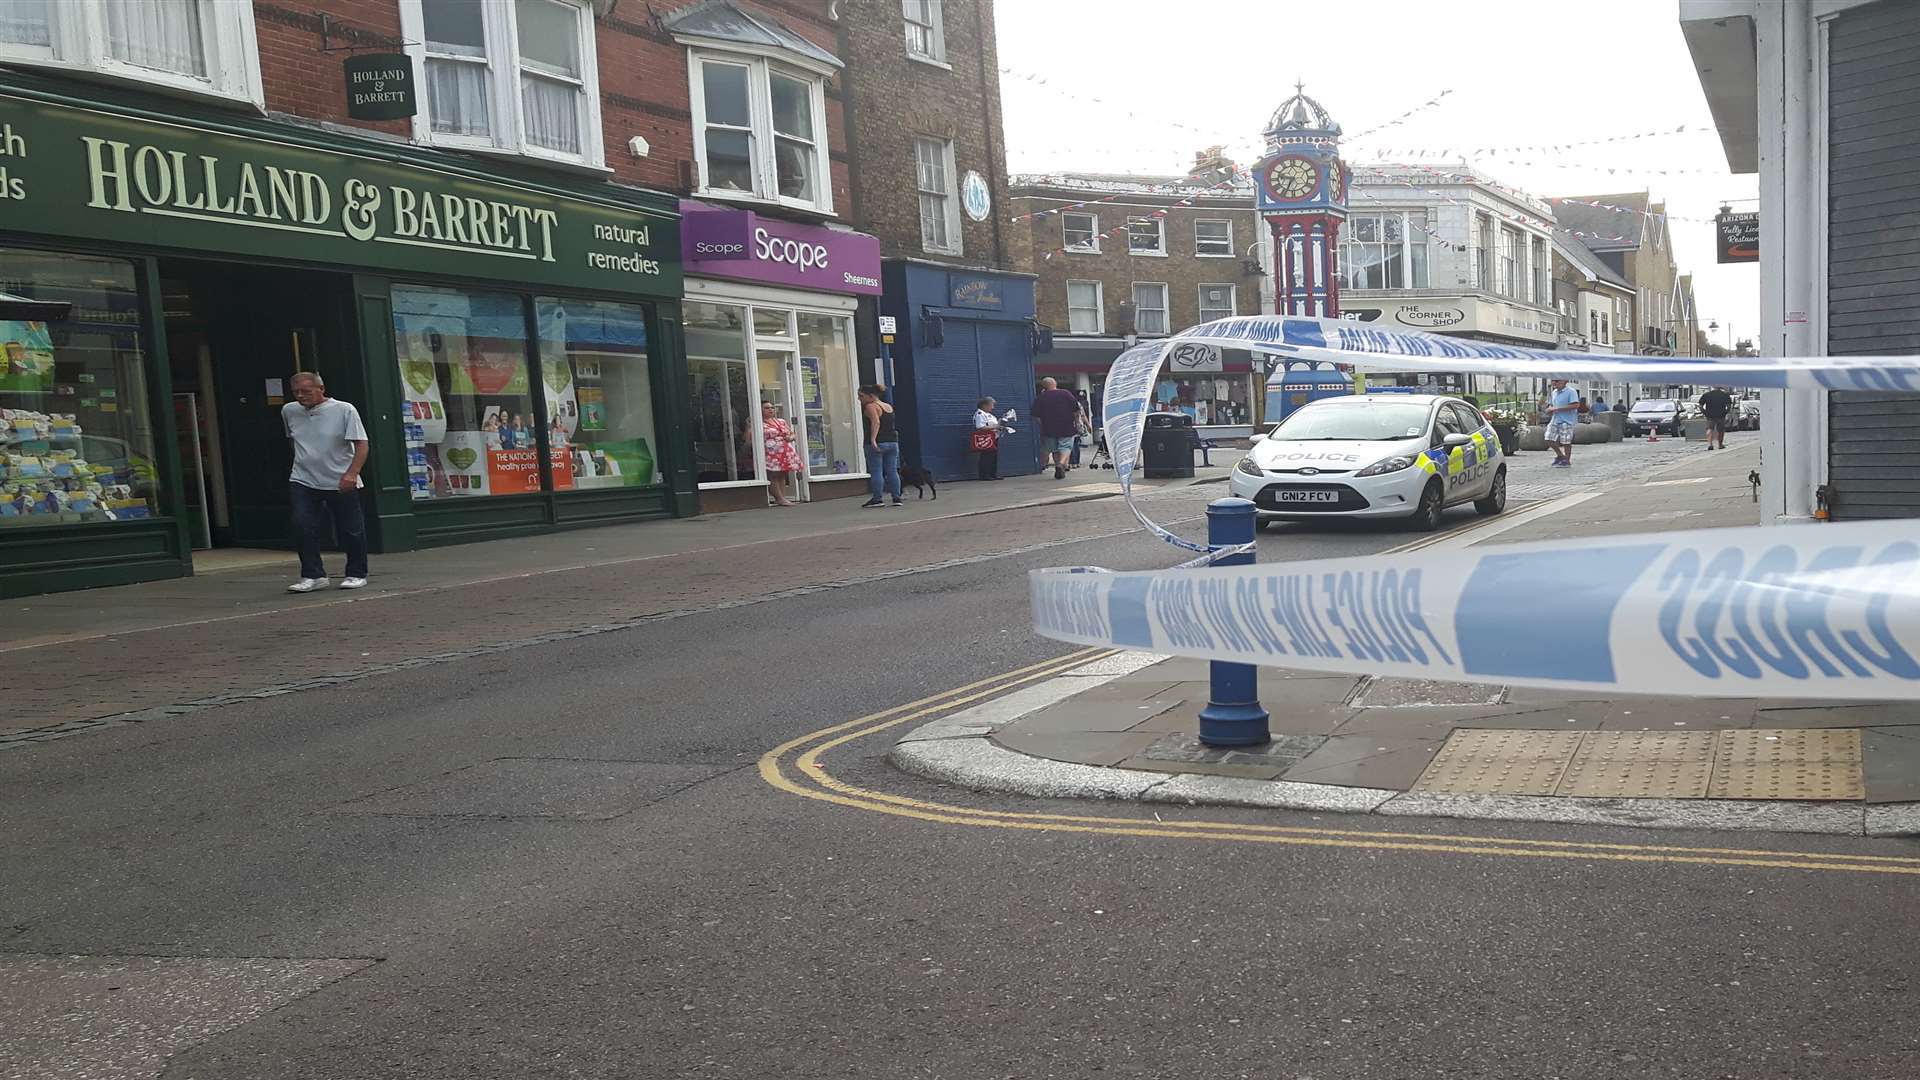 A section of the high street was cordoned off